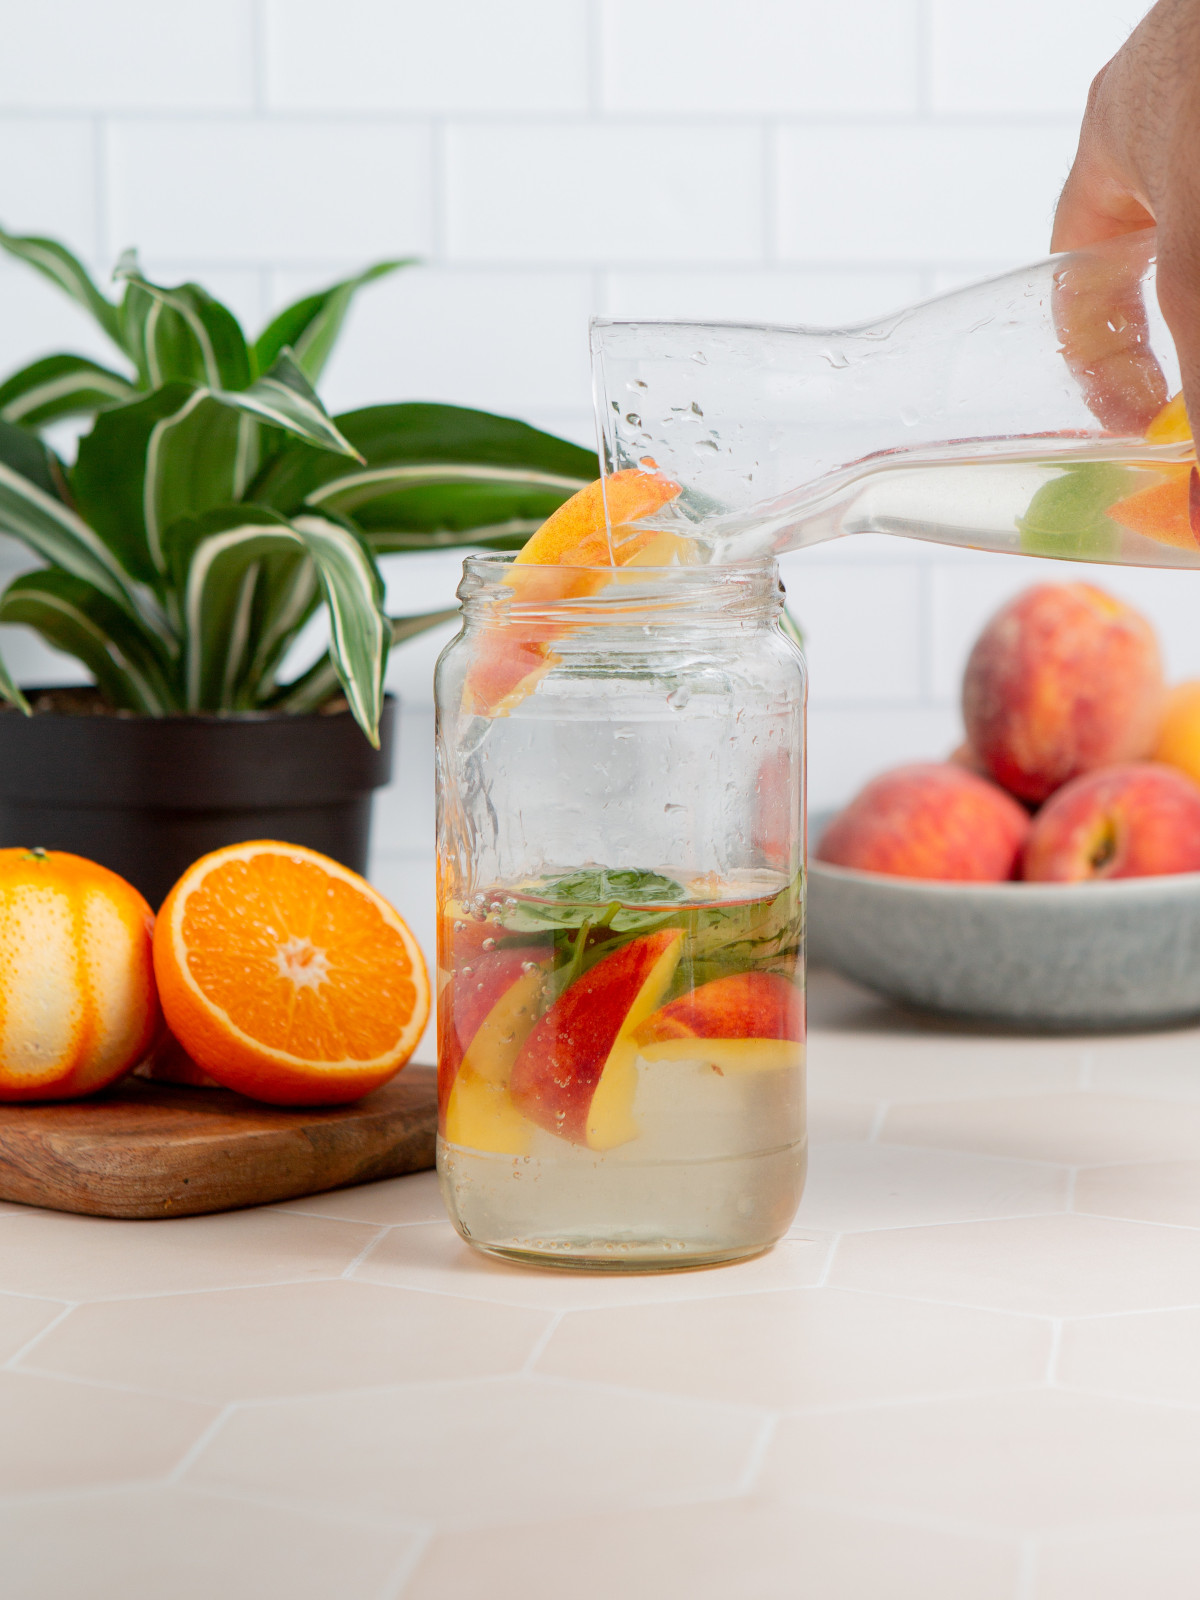 Peach infused water with basil being poured from a glass pitcher into a glass jar.